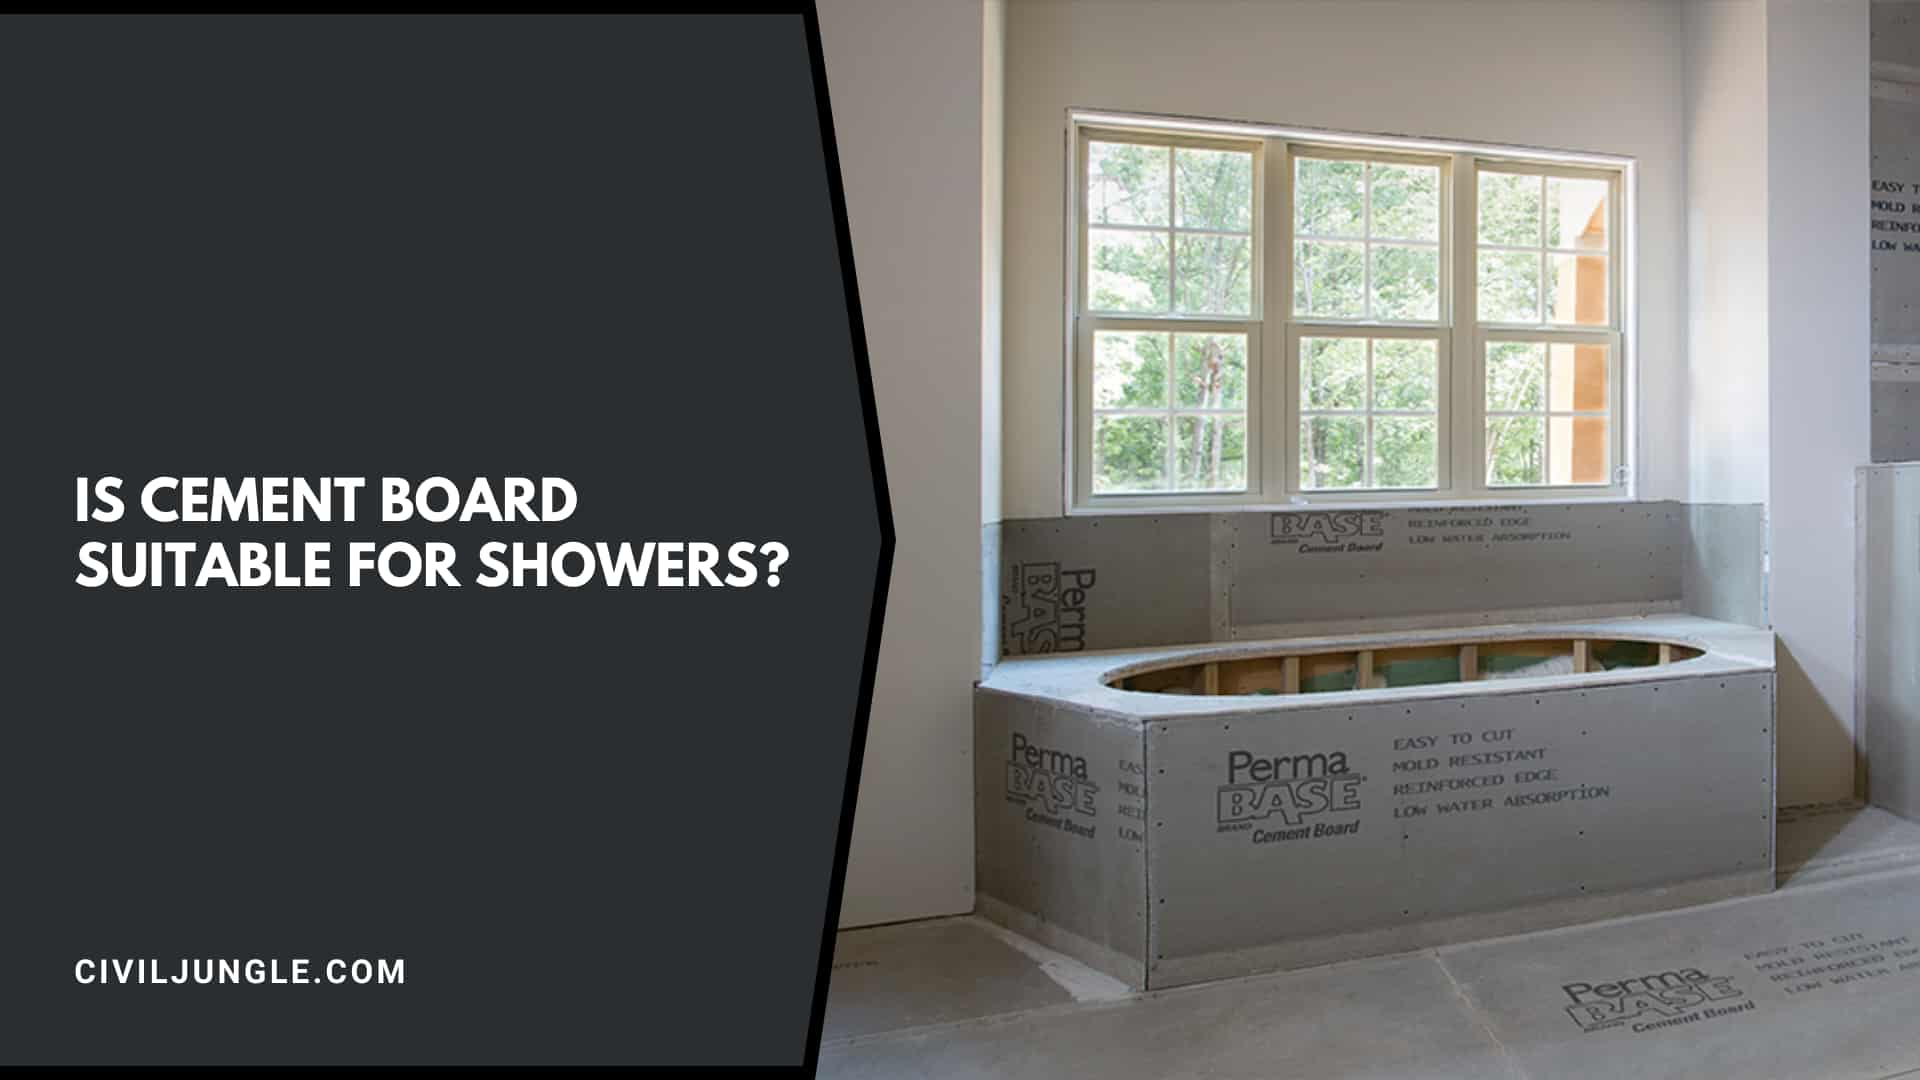 Is Cement Board Suitable for Showers?